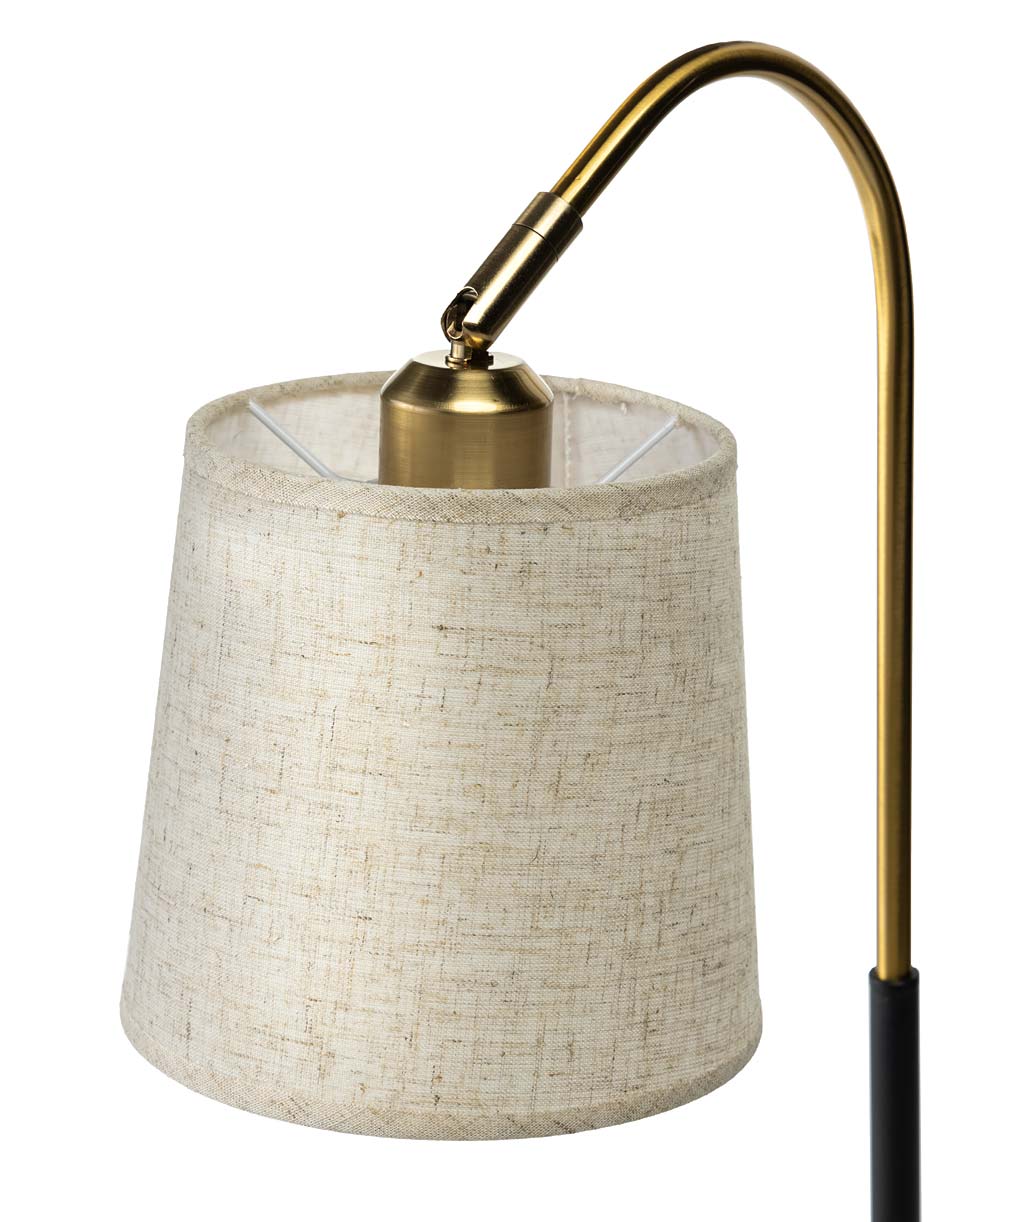 Desk Lamp With USB Port And Fabric Shade